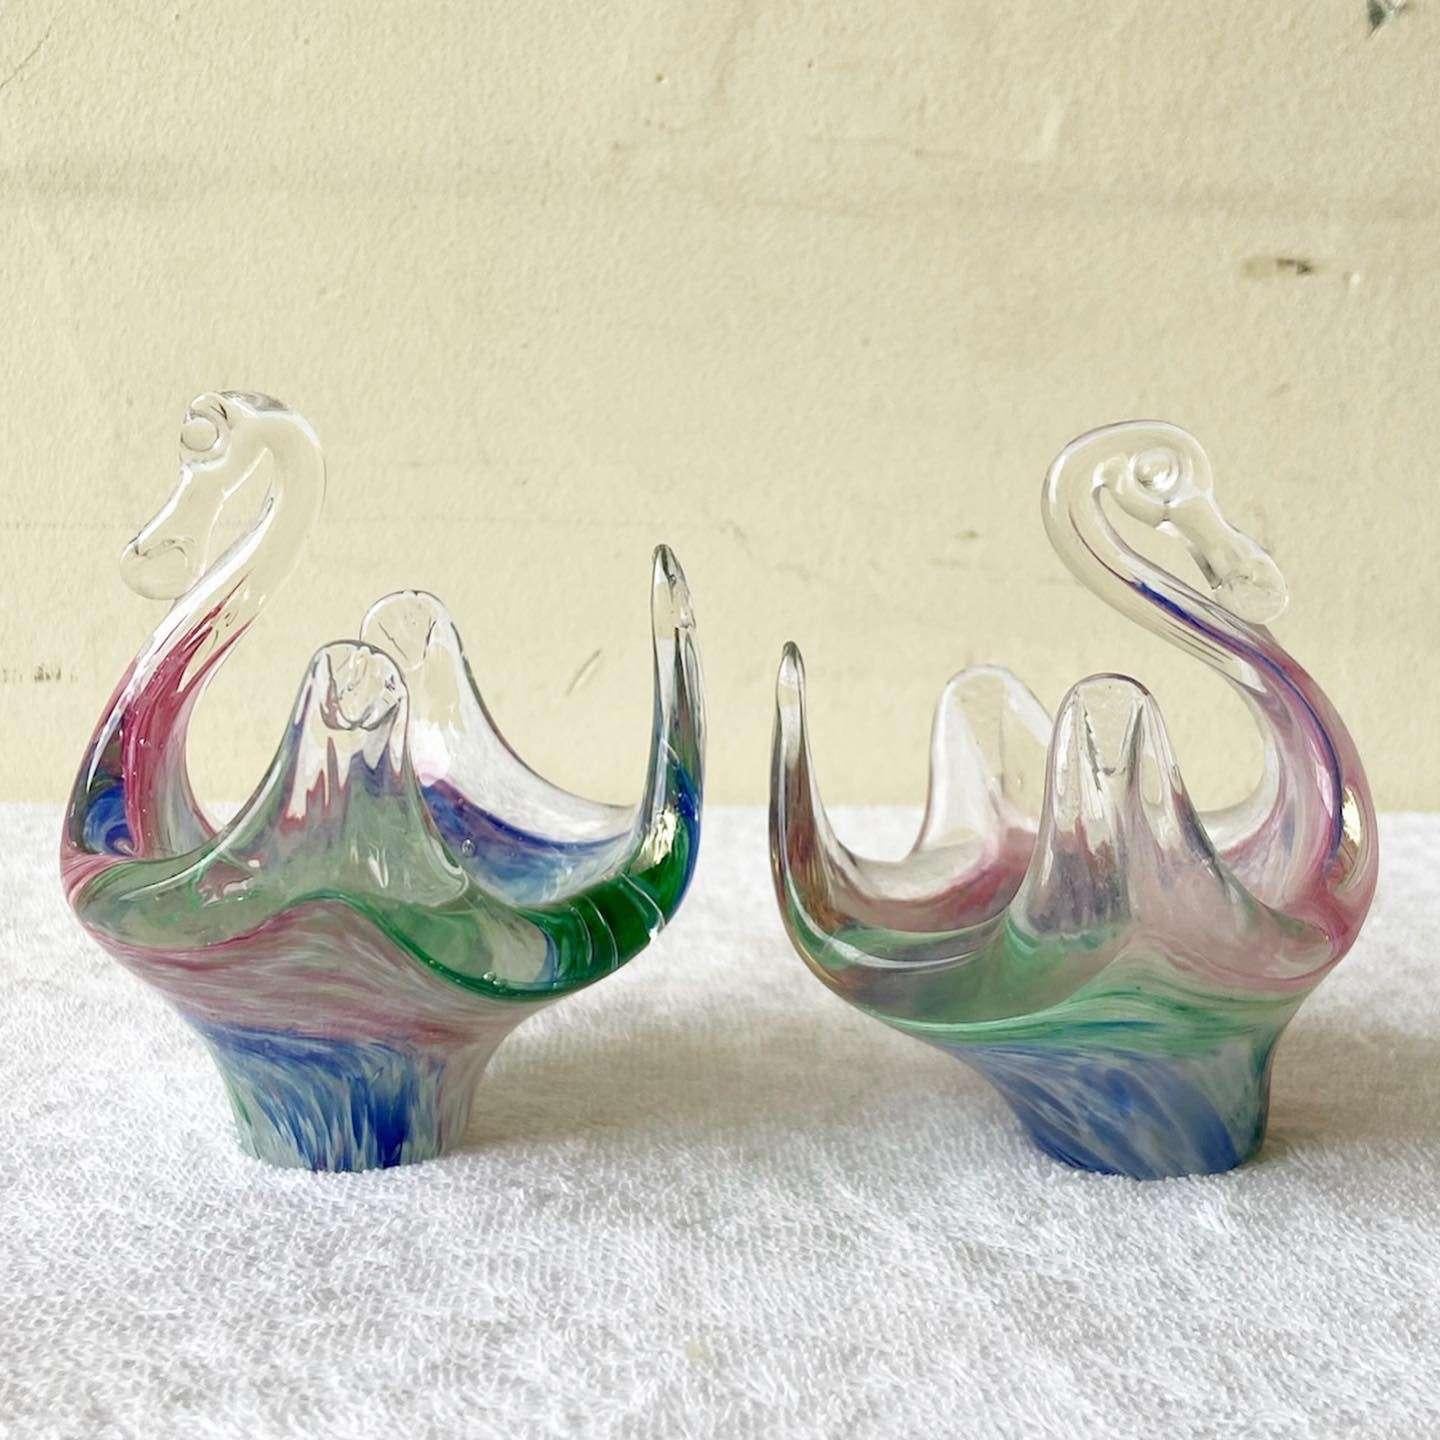 Amazing pair of hand blown glass seams. Each feature a green, pink and blue interior.
